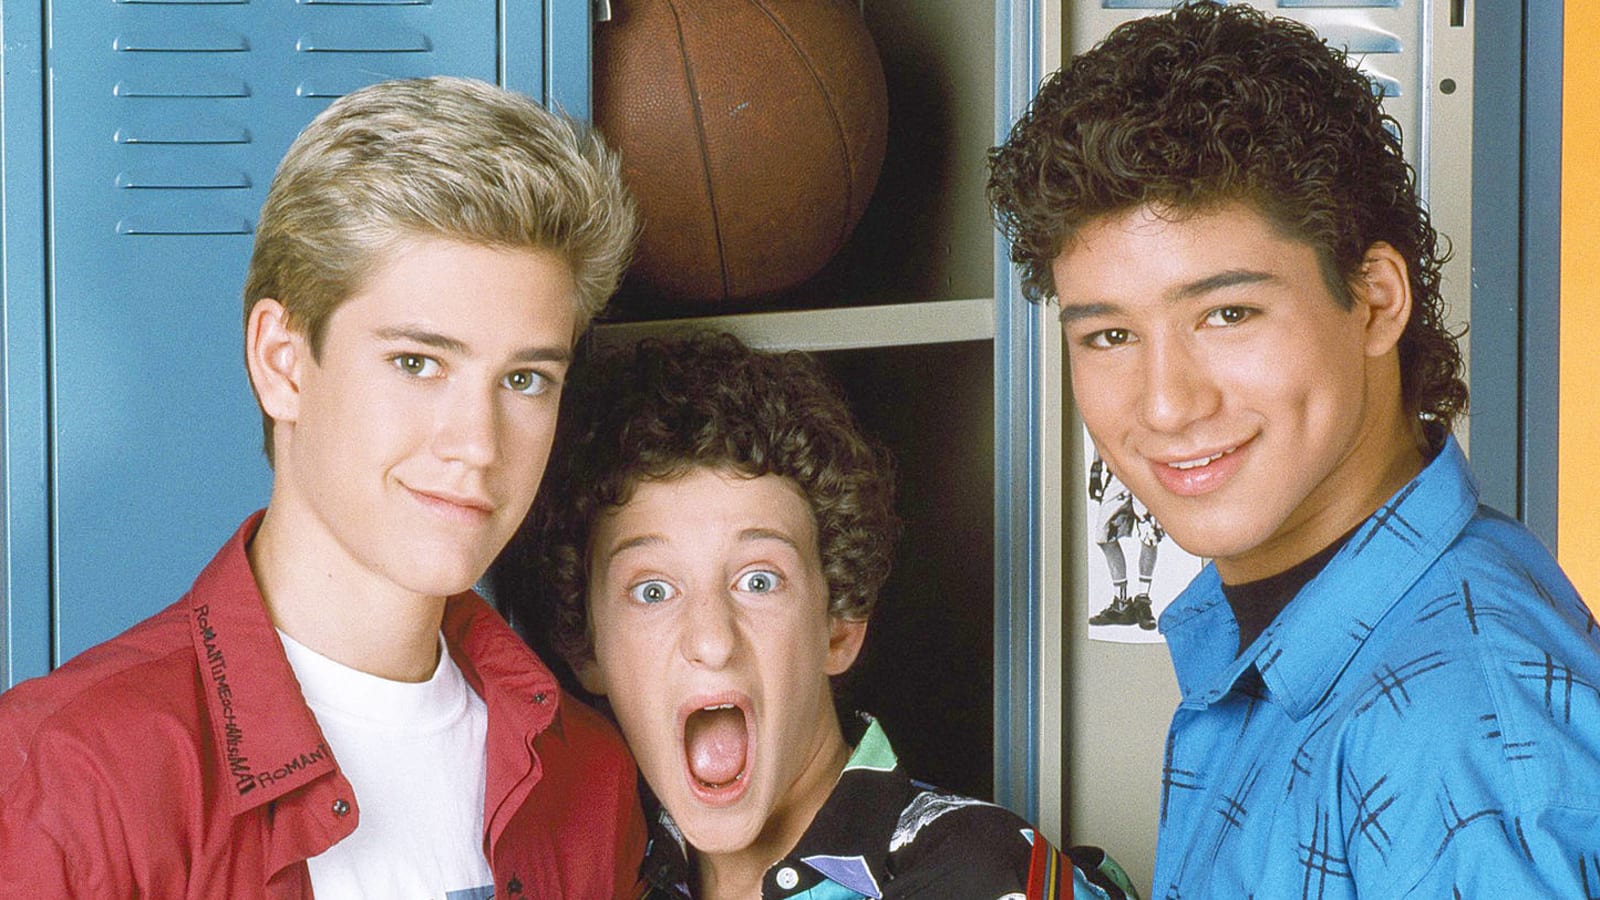 Dustin Diamond to receive special tribute on 'Saved by the Bell' Season 2 